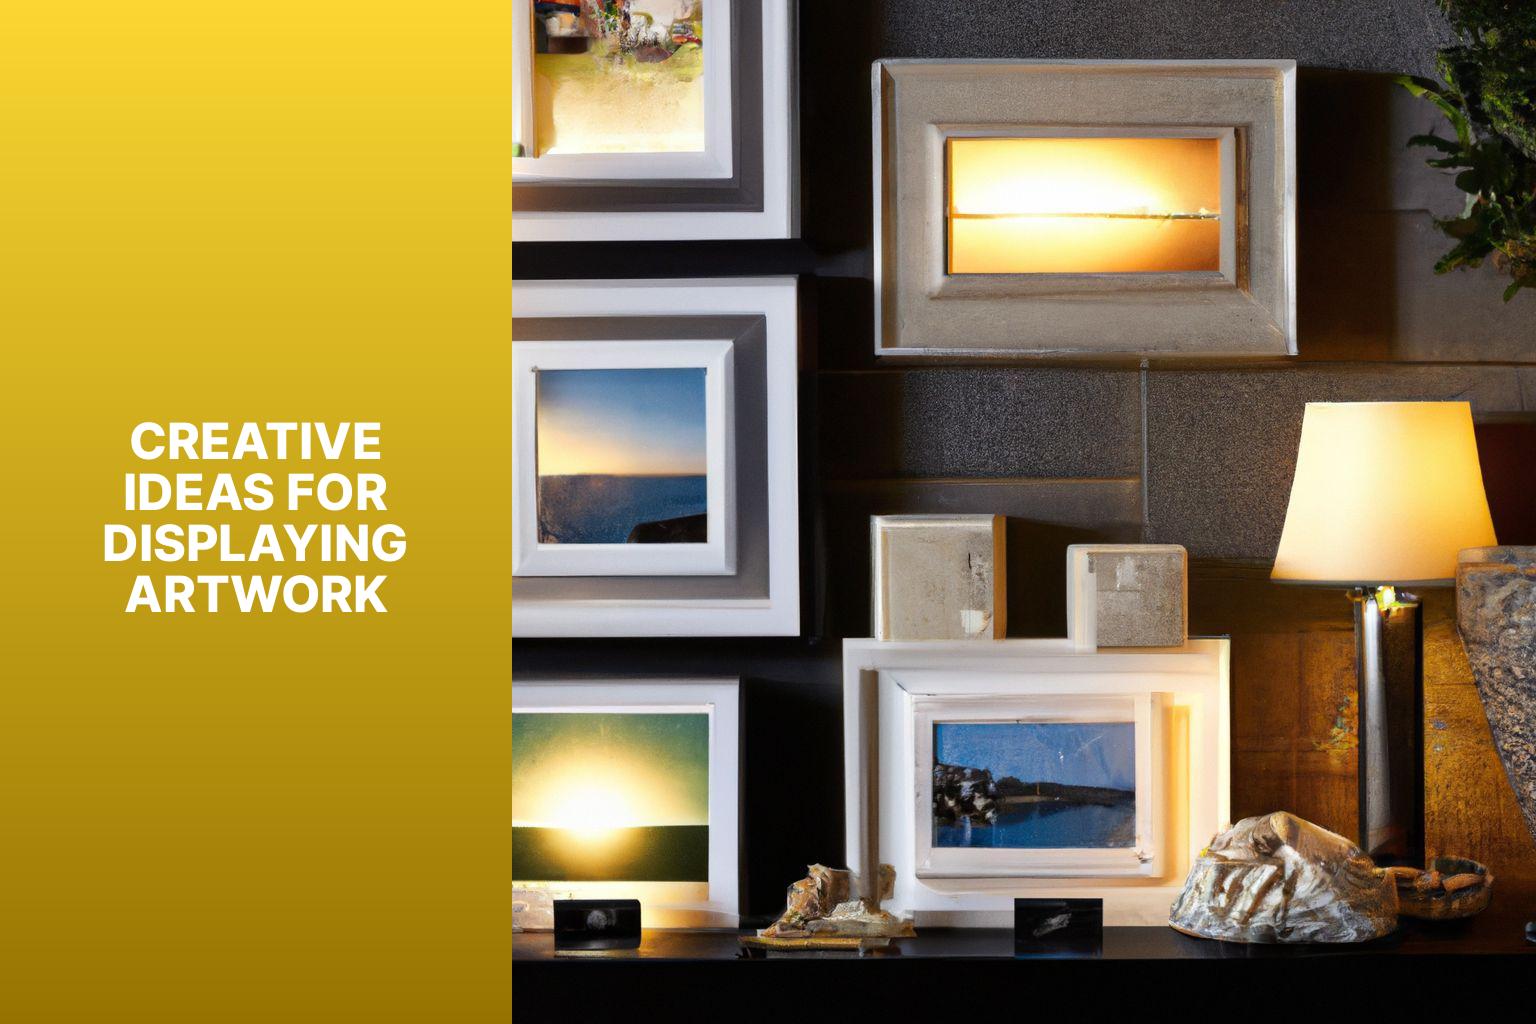 Creative Ideas for Displaying Artwork - Art on Wall: Creative Ideas for Displaying Your Artwork 